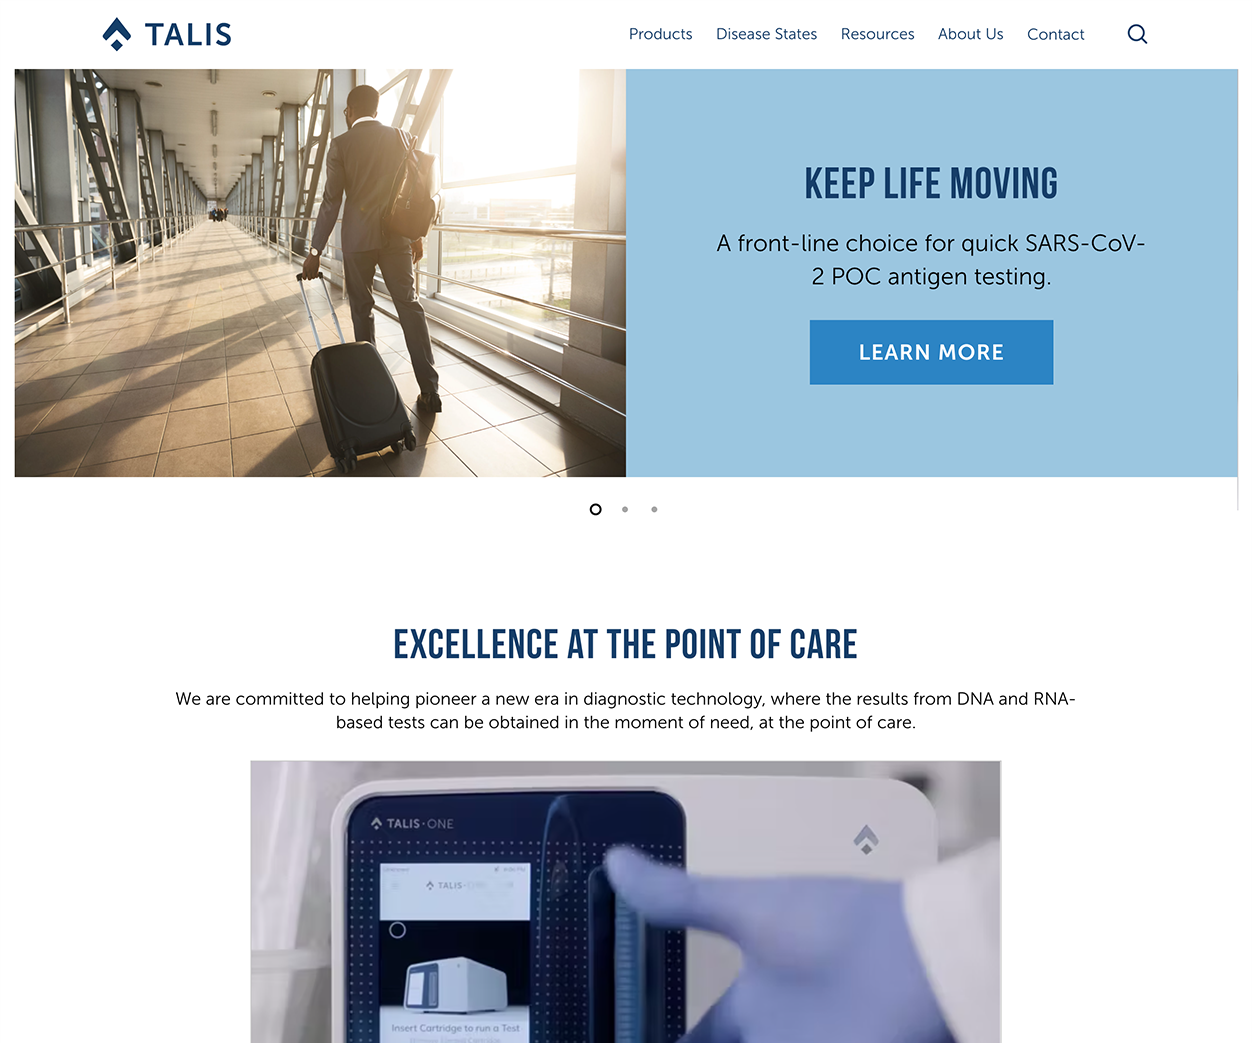 Talis Case Study homepage redesign